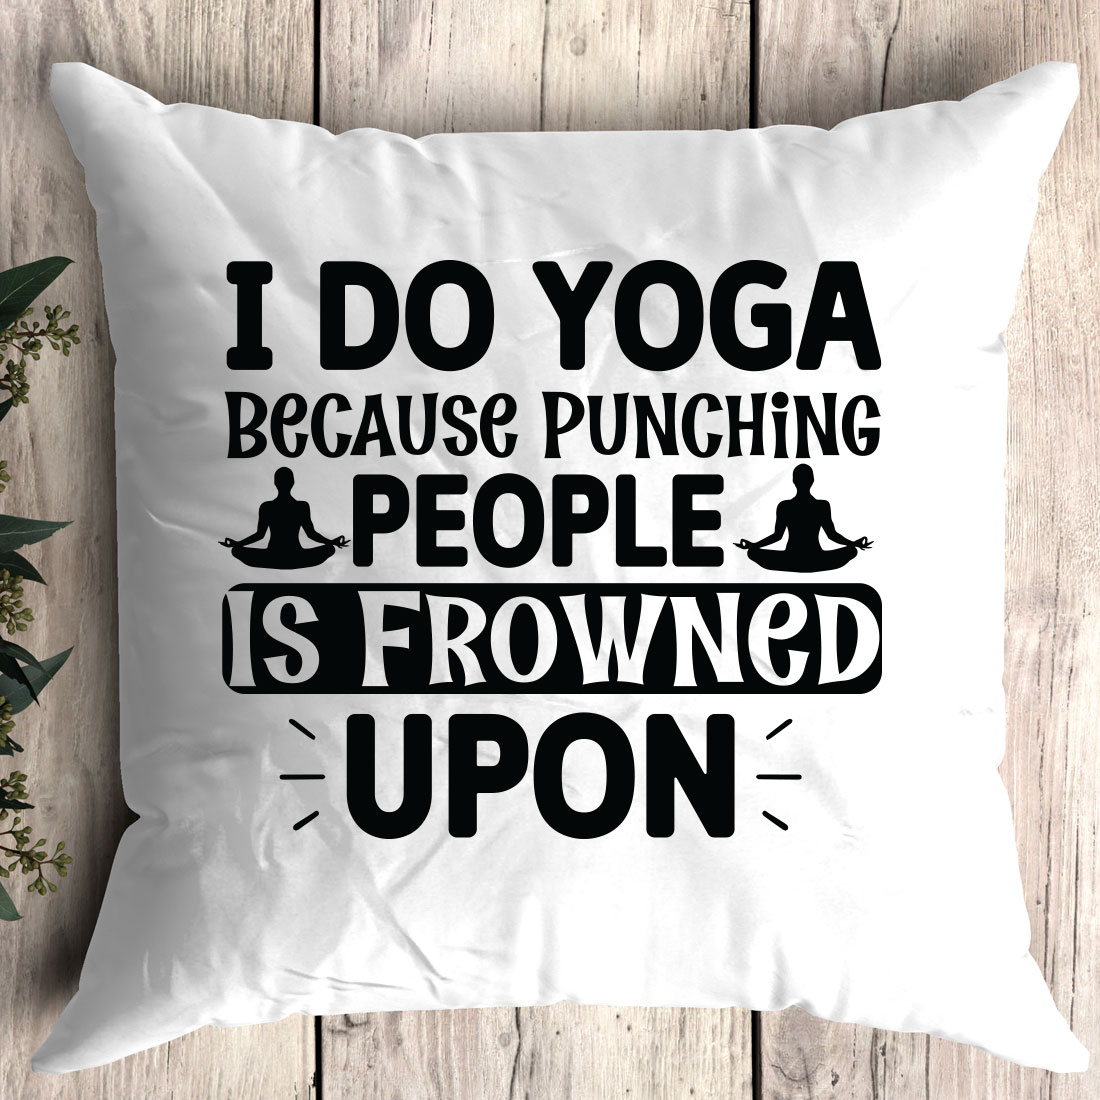 Pillow that says i do yoga because punching people is growing upn.